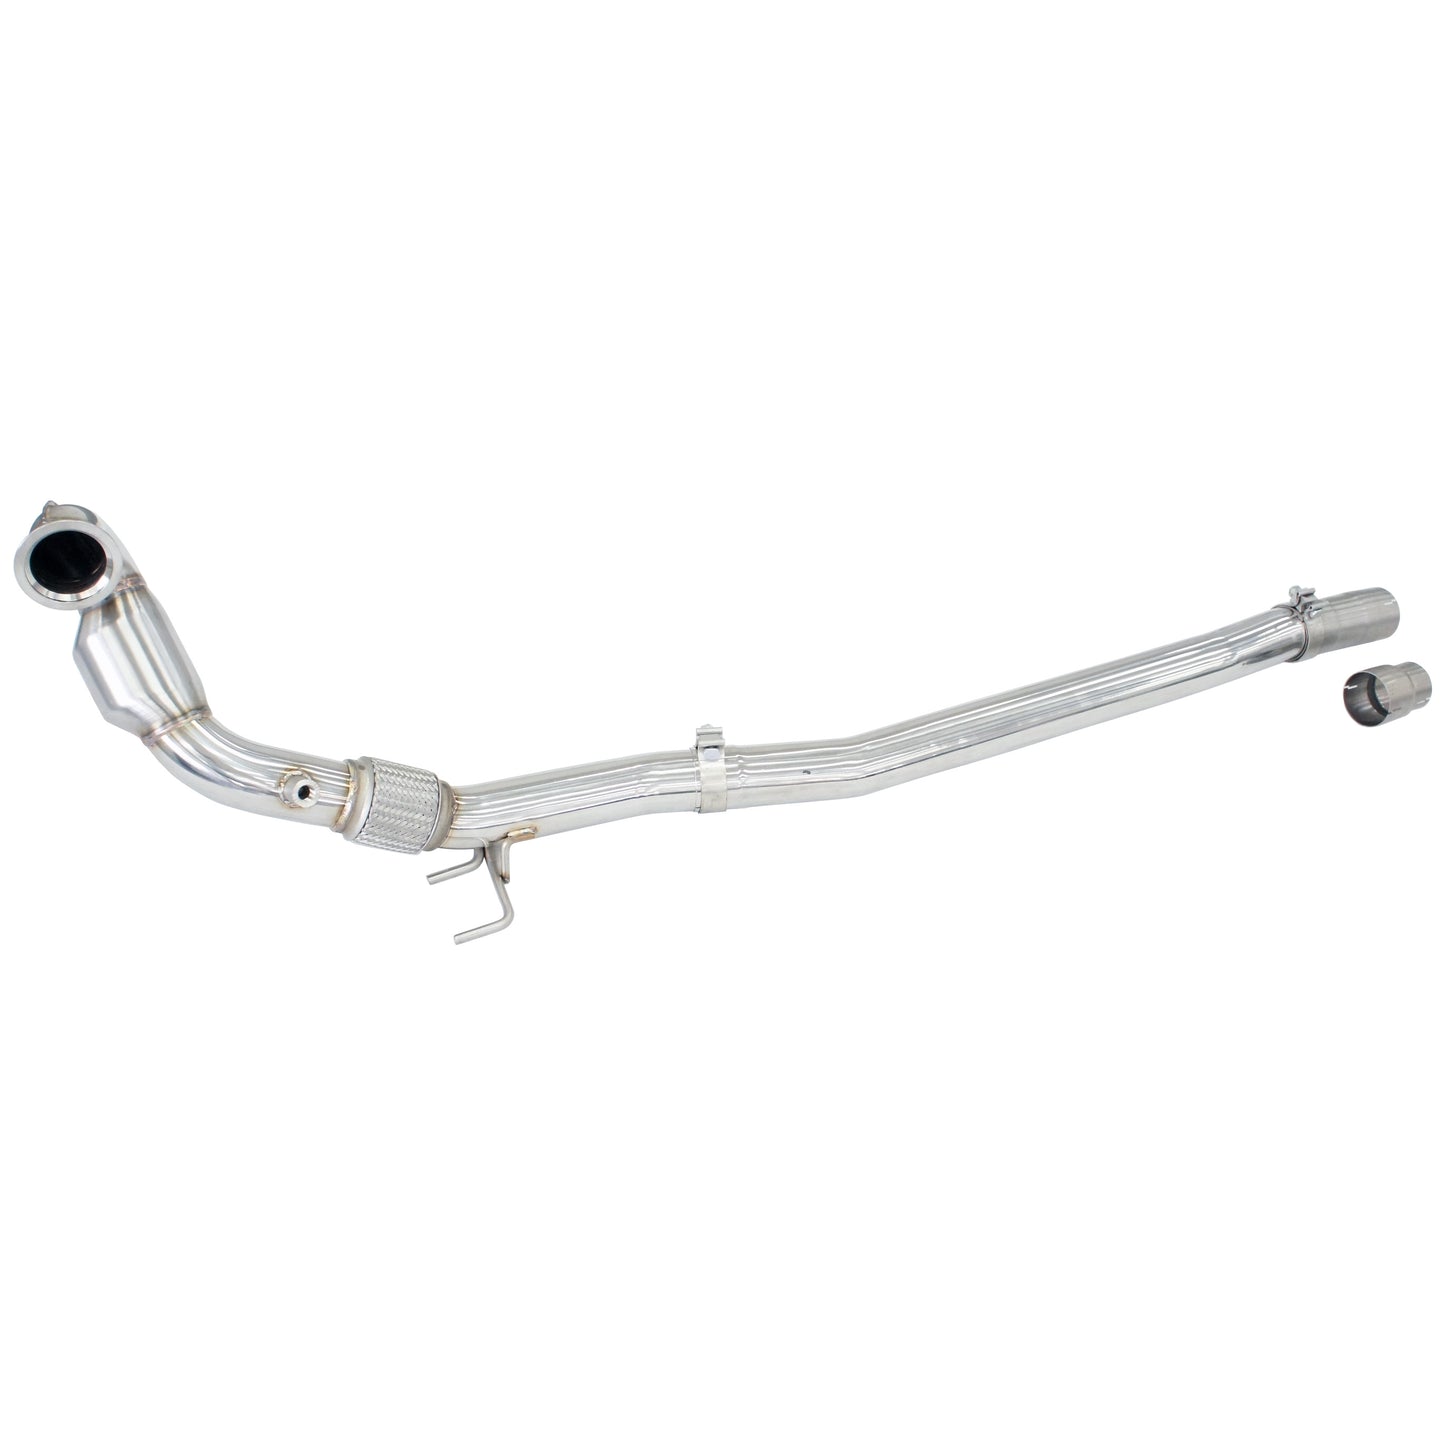 R400 Valved Turbo Back Exhaust w/Oval Tips - VW Golf R Mk7